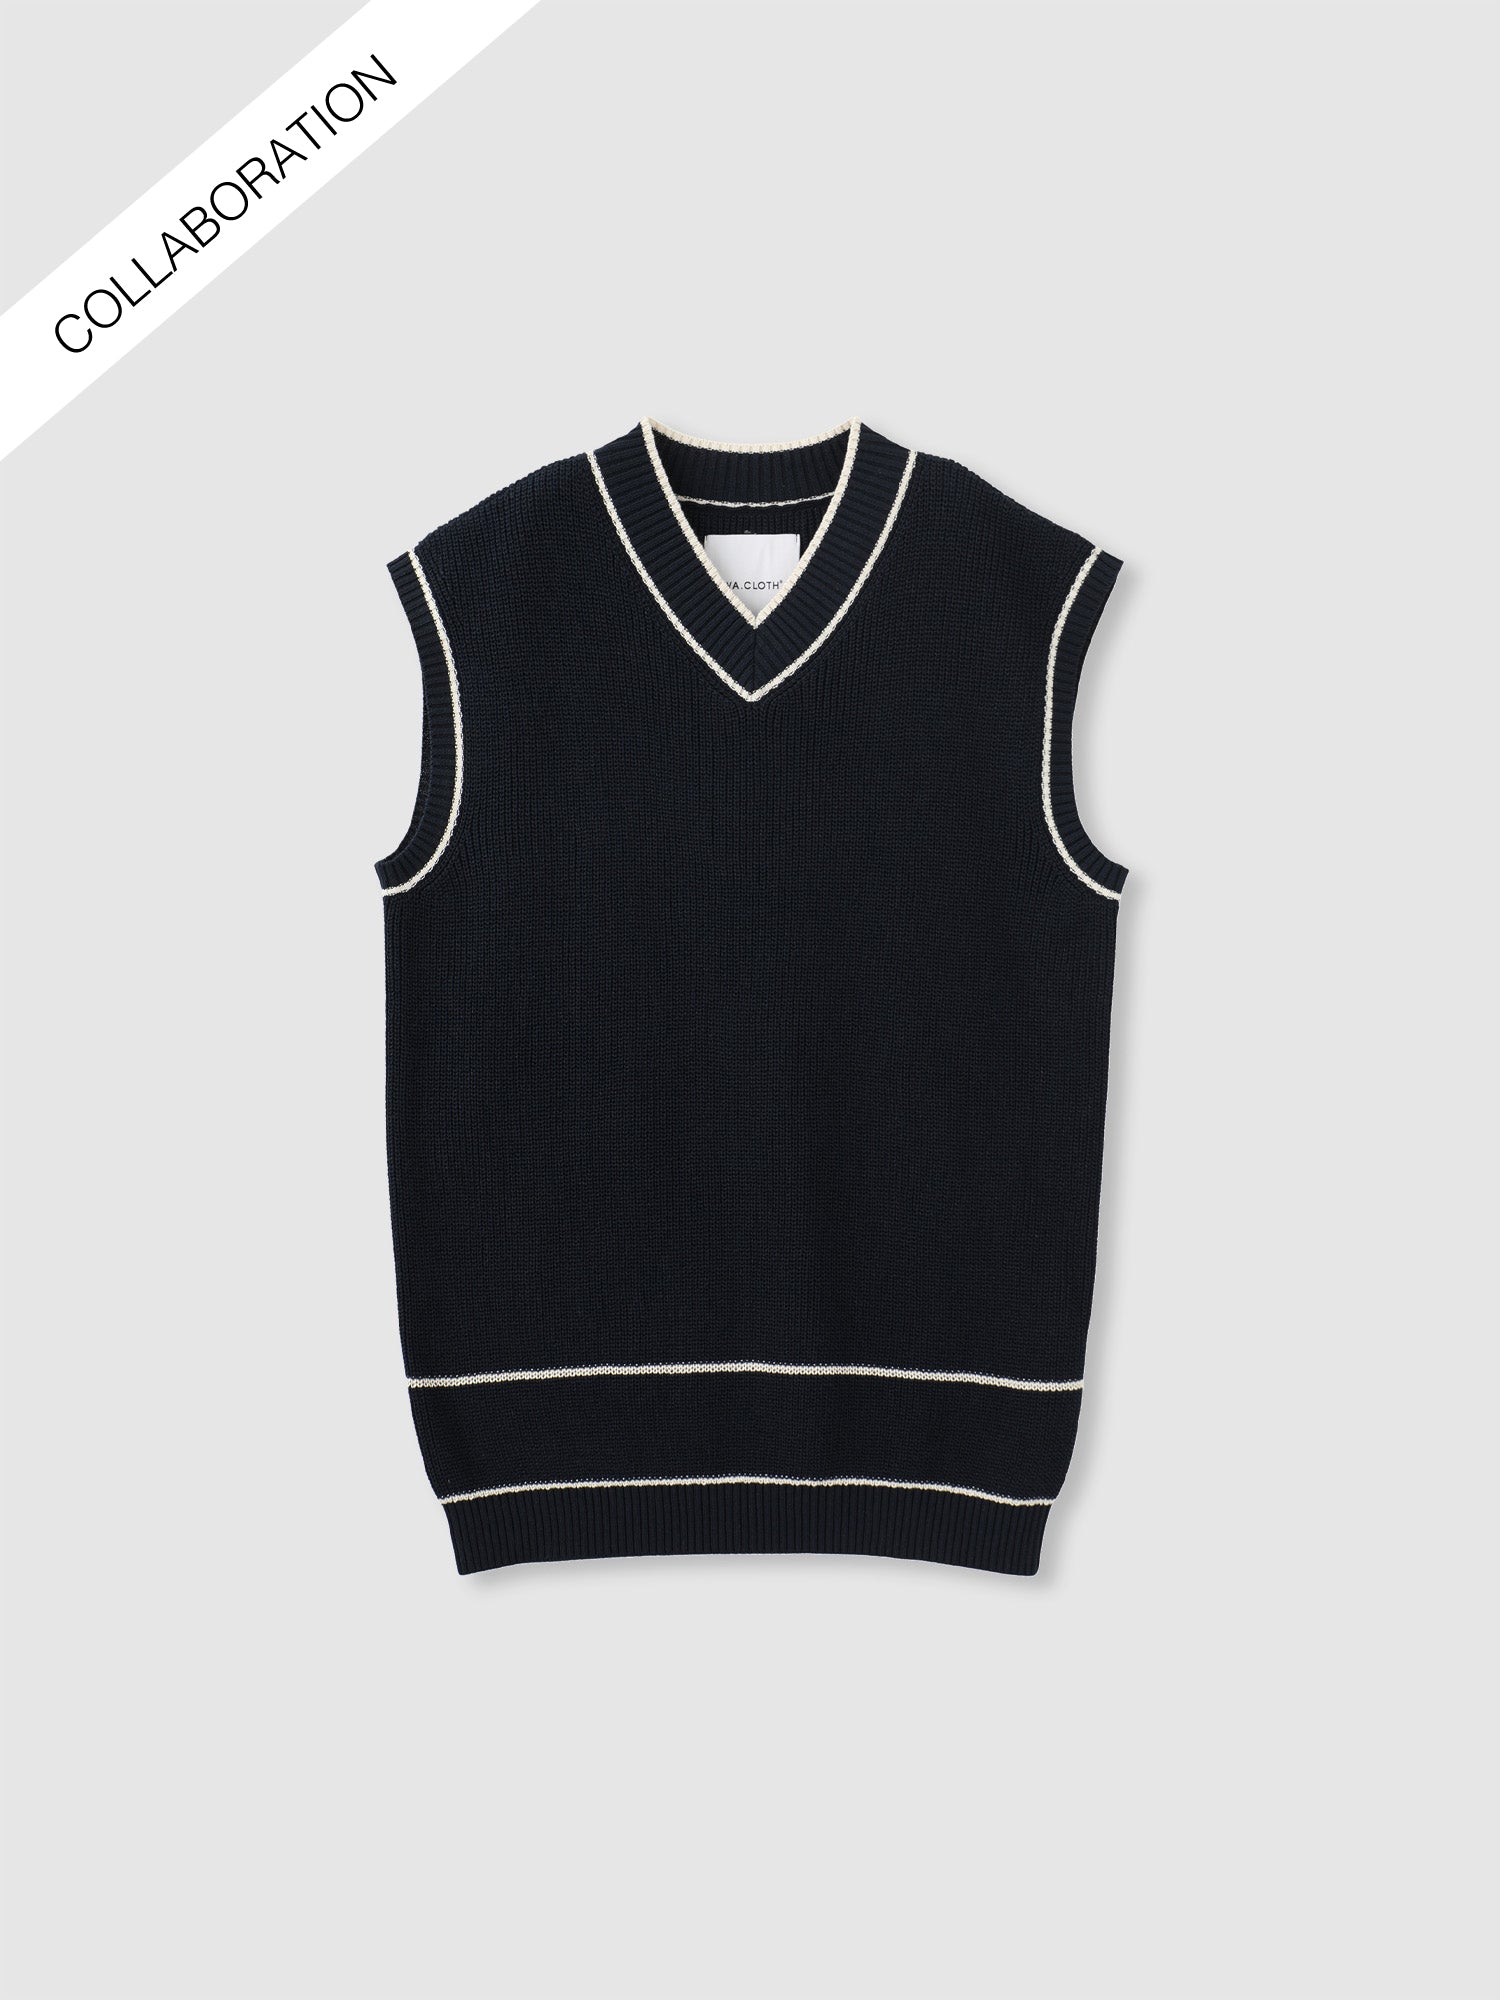 CT COLLAB STRIPED VEST <br> レイヤーコーディネートの新定番